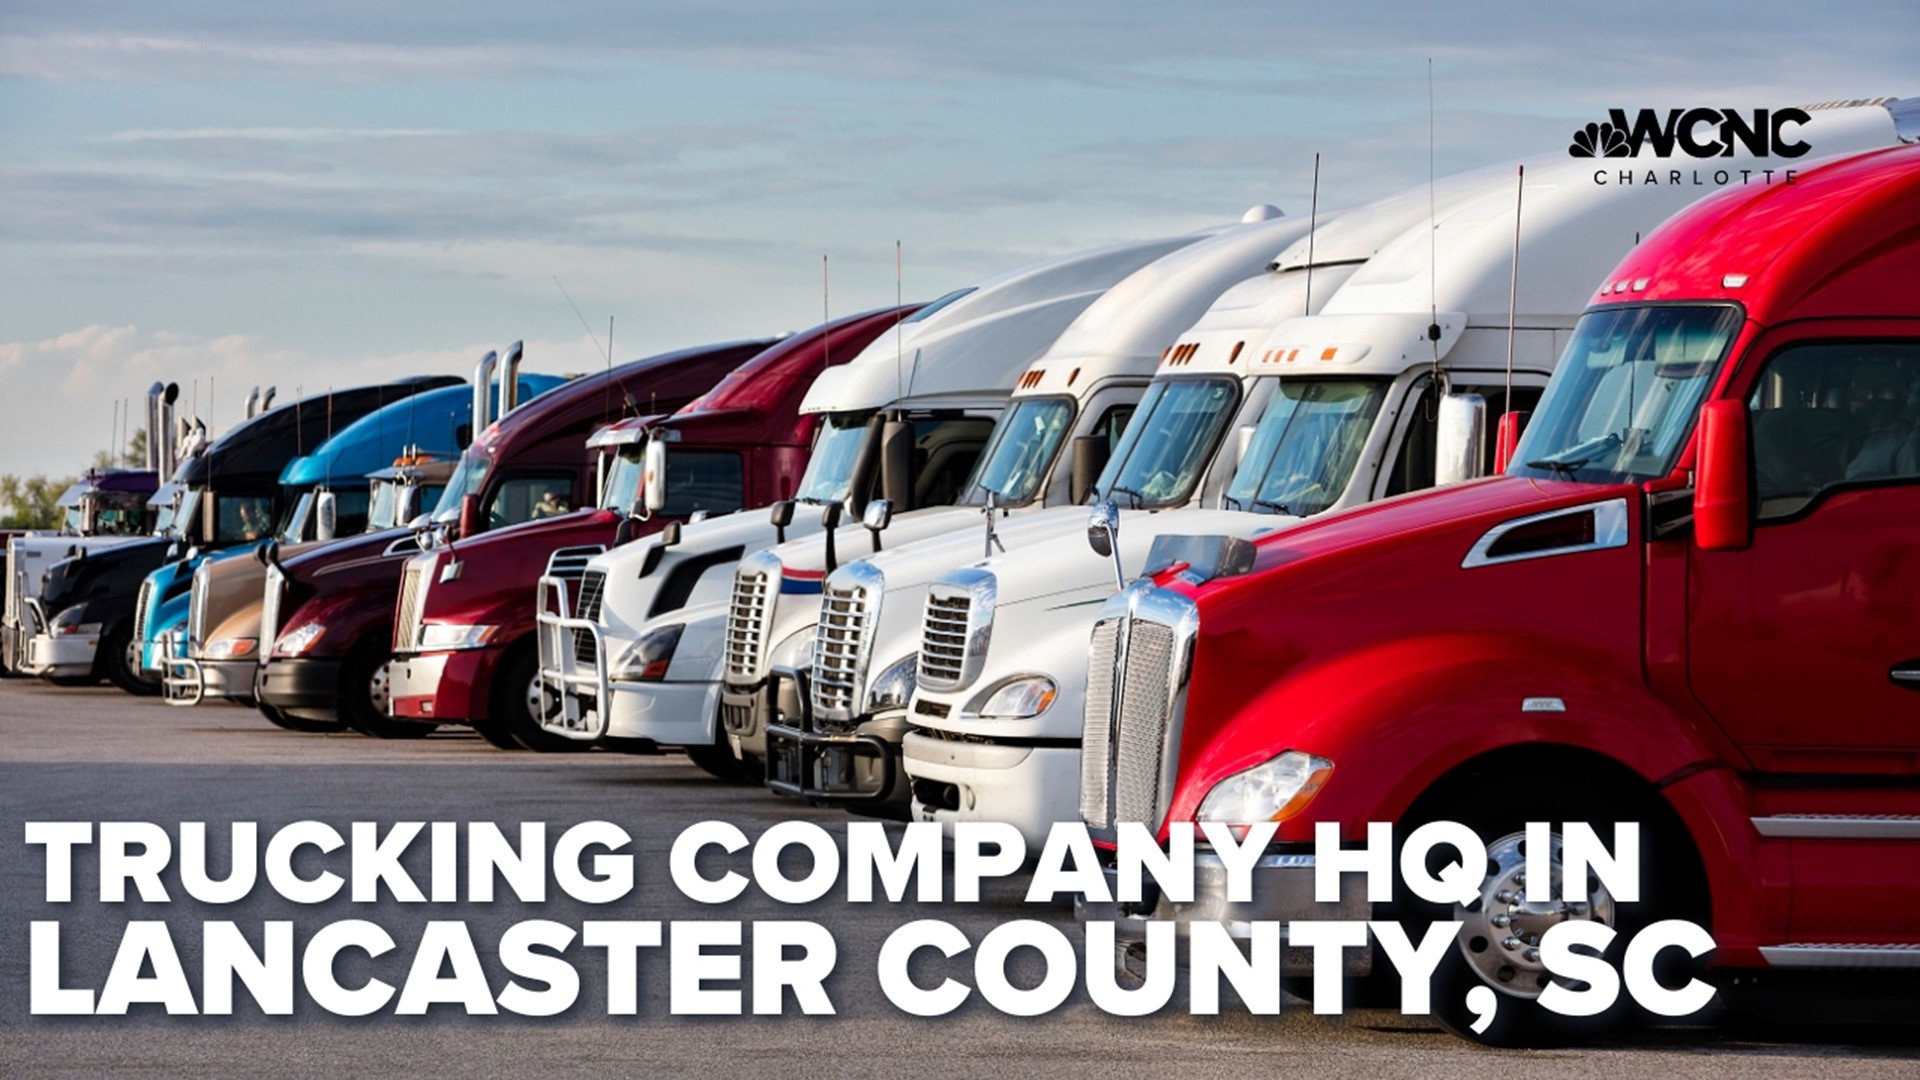 The company is a service provider for the trucking industry.